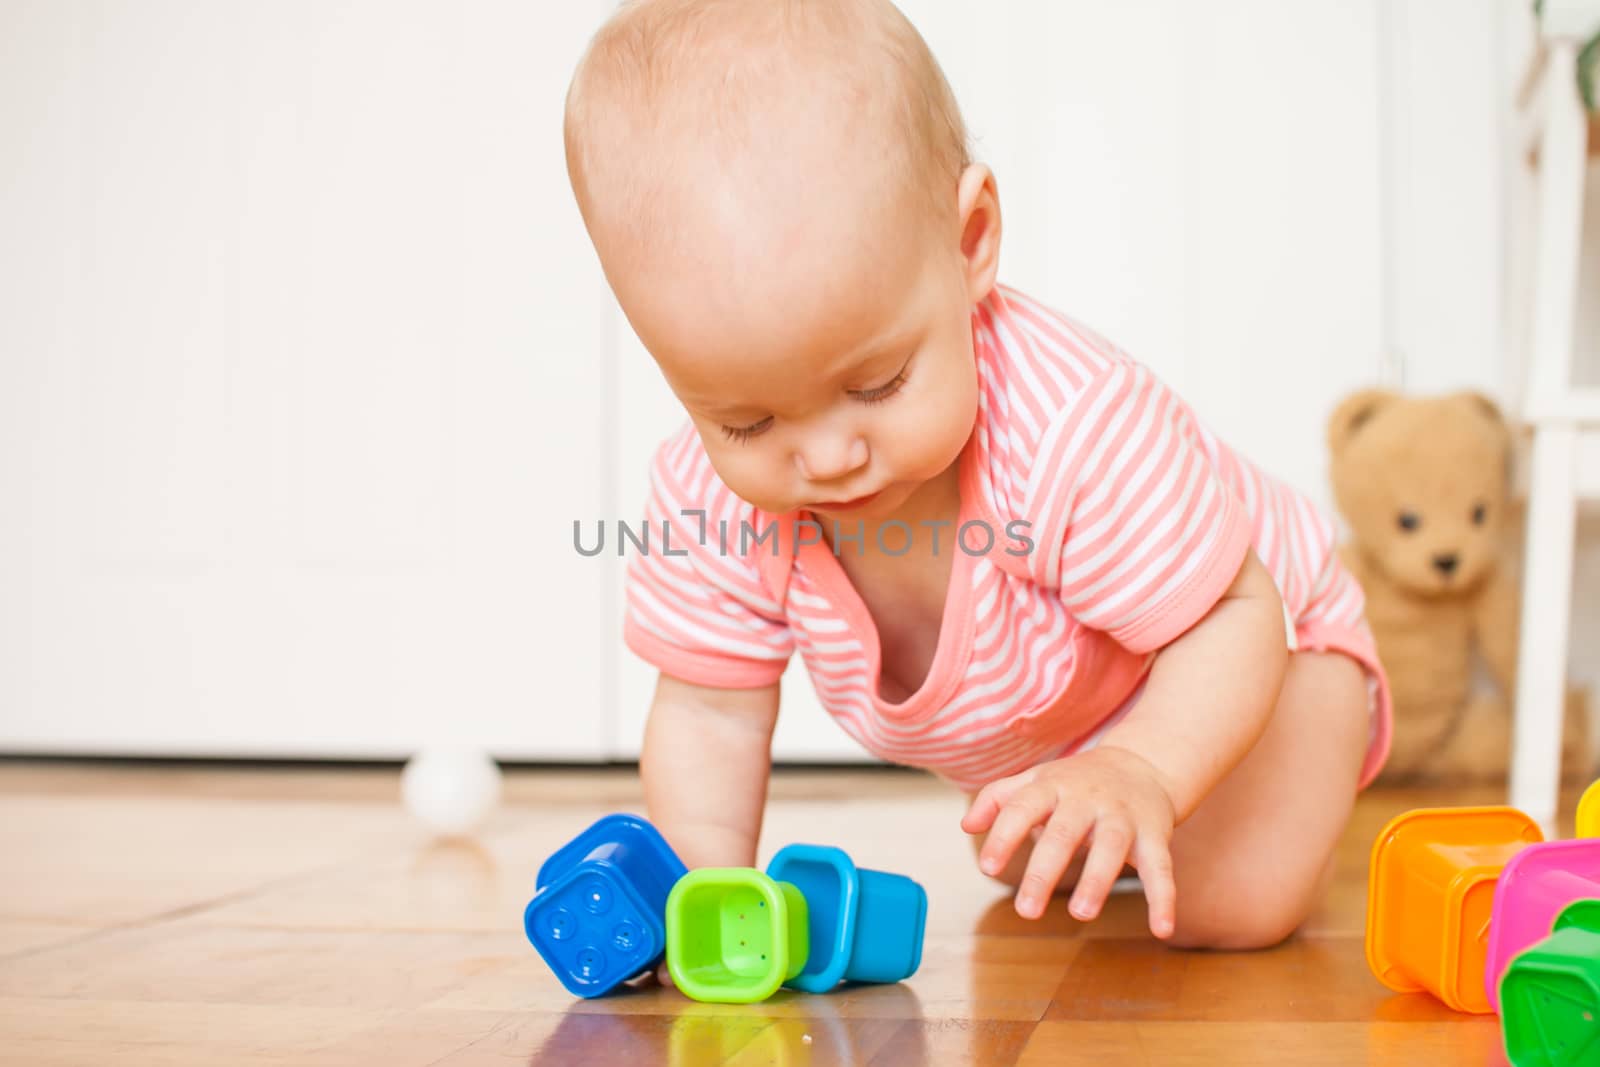 Little baby girl sitting on the floor, crawling and playing with brightly colored educational toys by malyshkamju